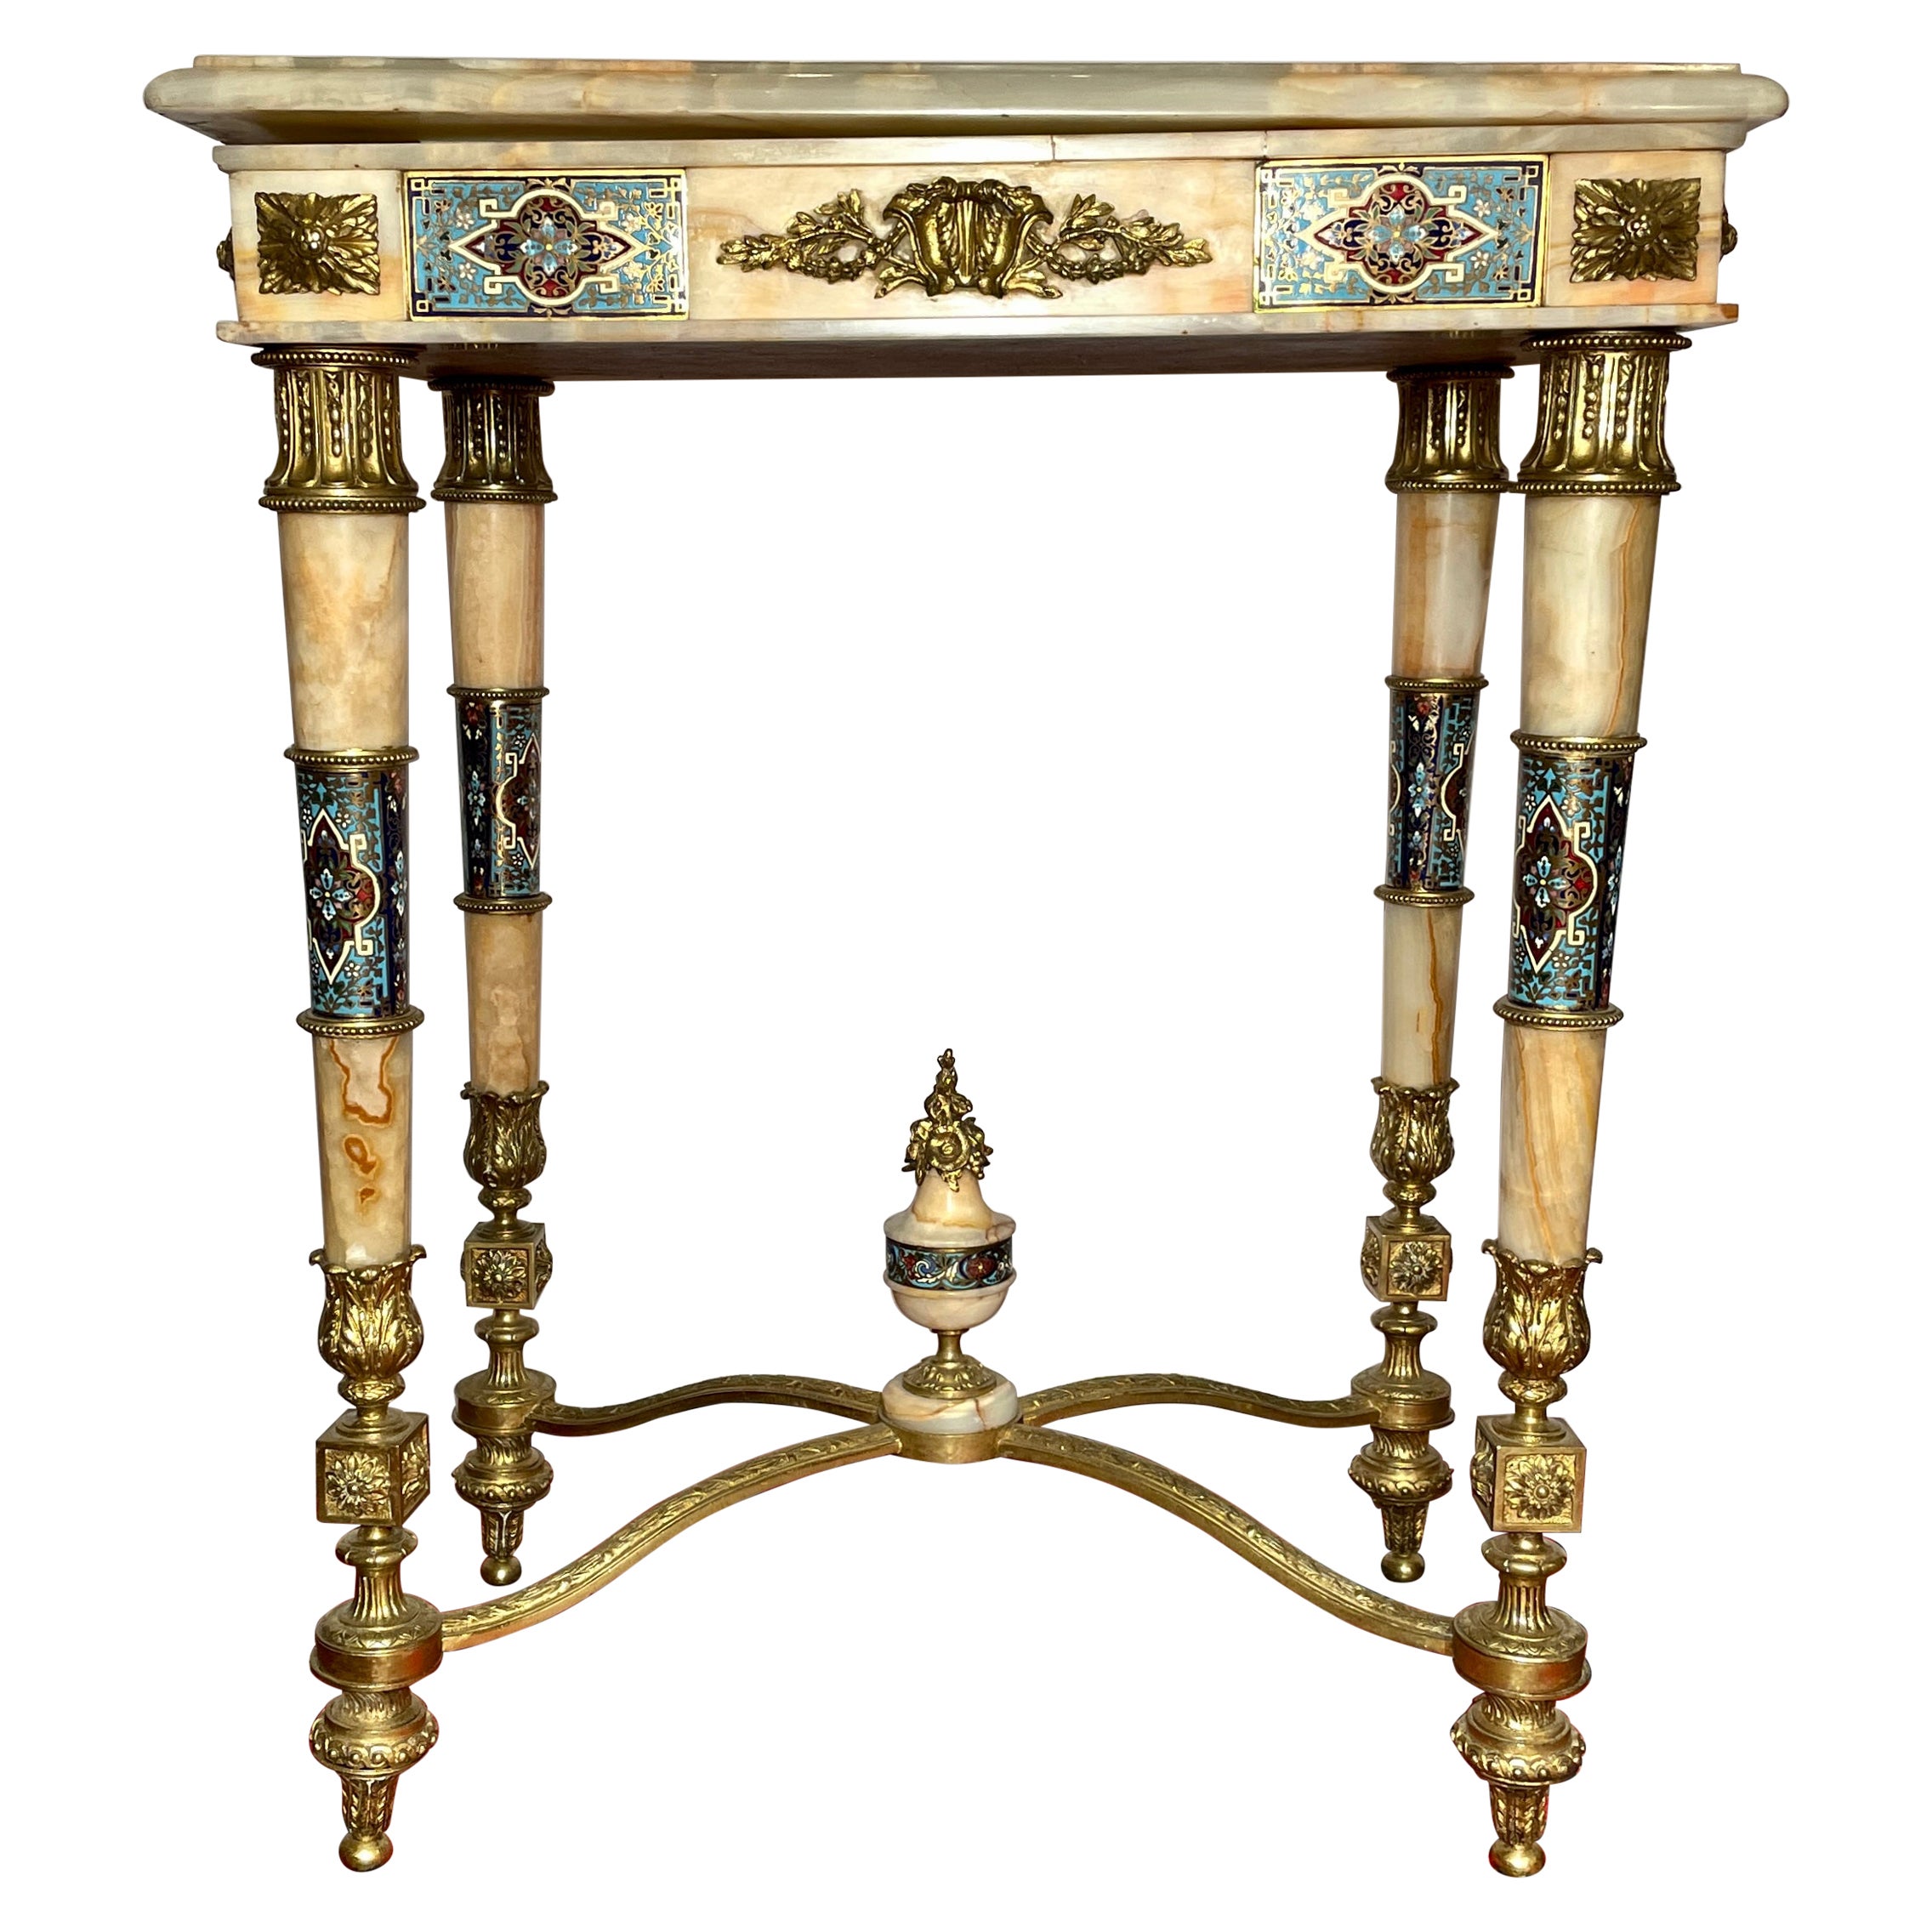 Antique Russian Onyx Marble, Ormolu and Enamel Porcelain Table, Circa 1875-1885